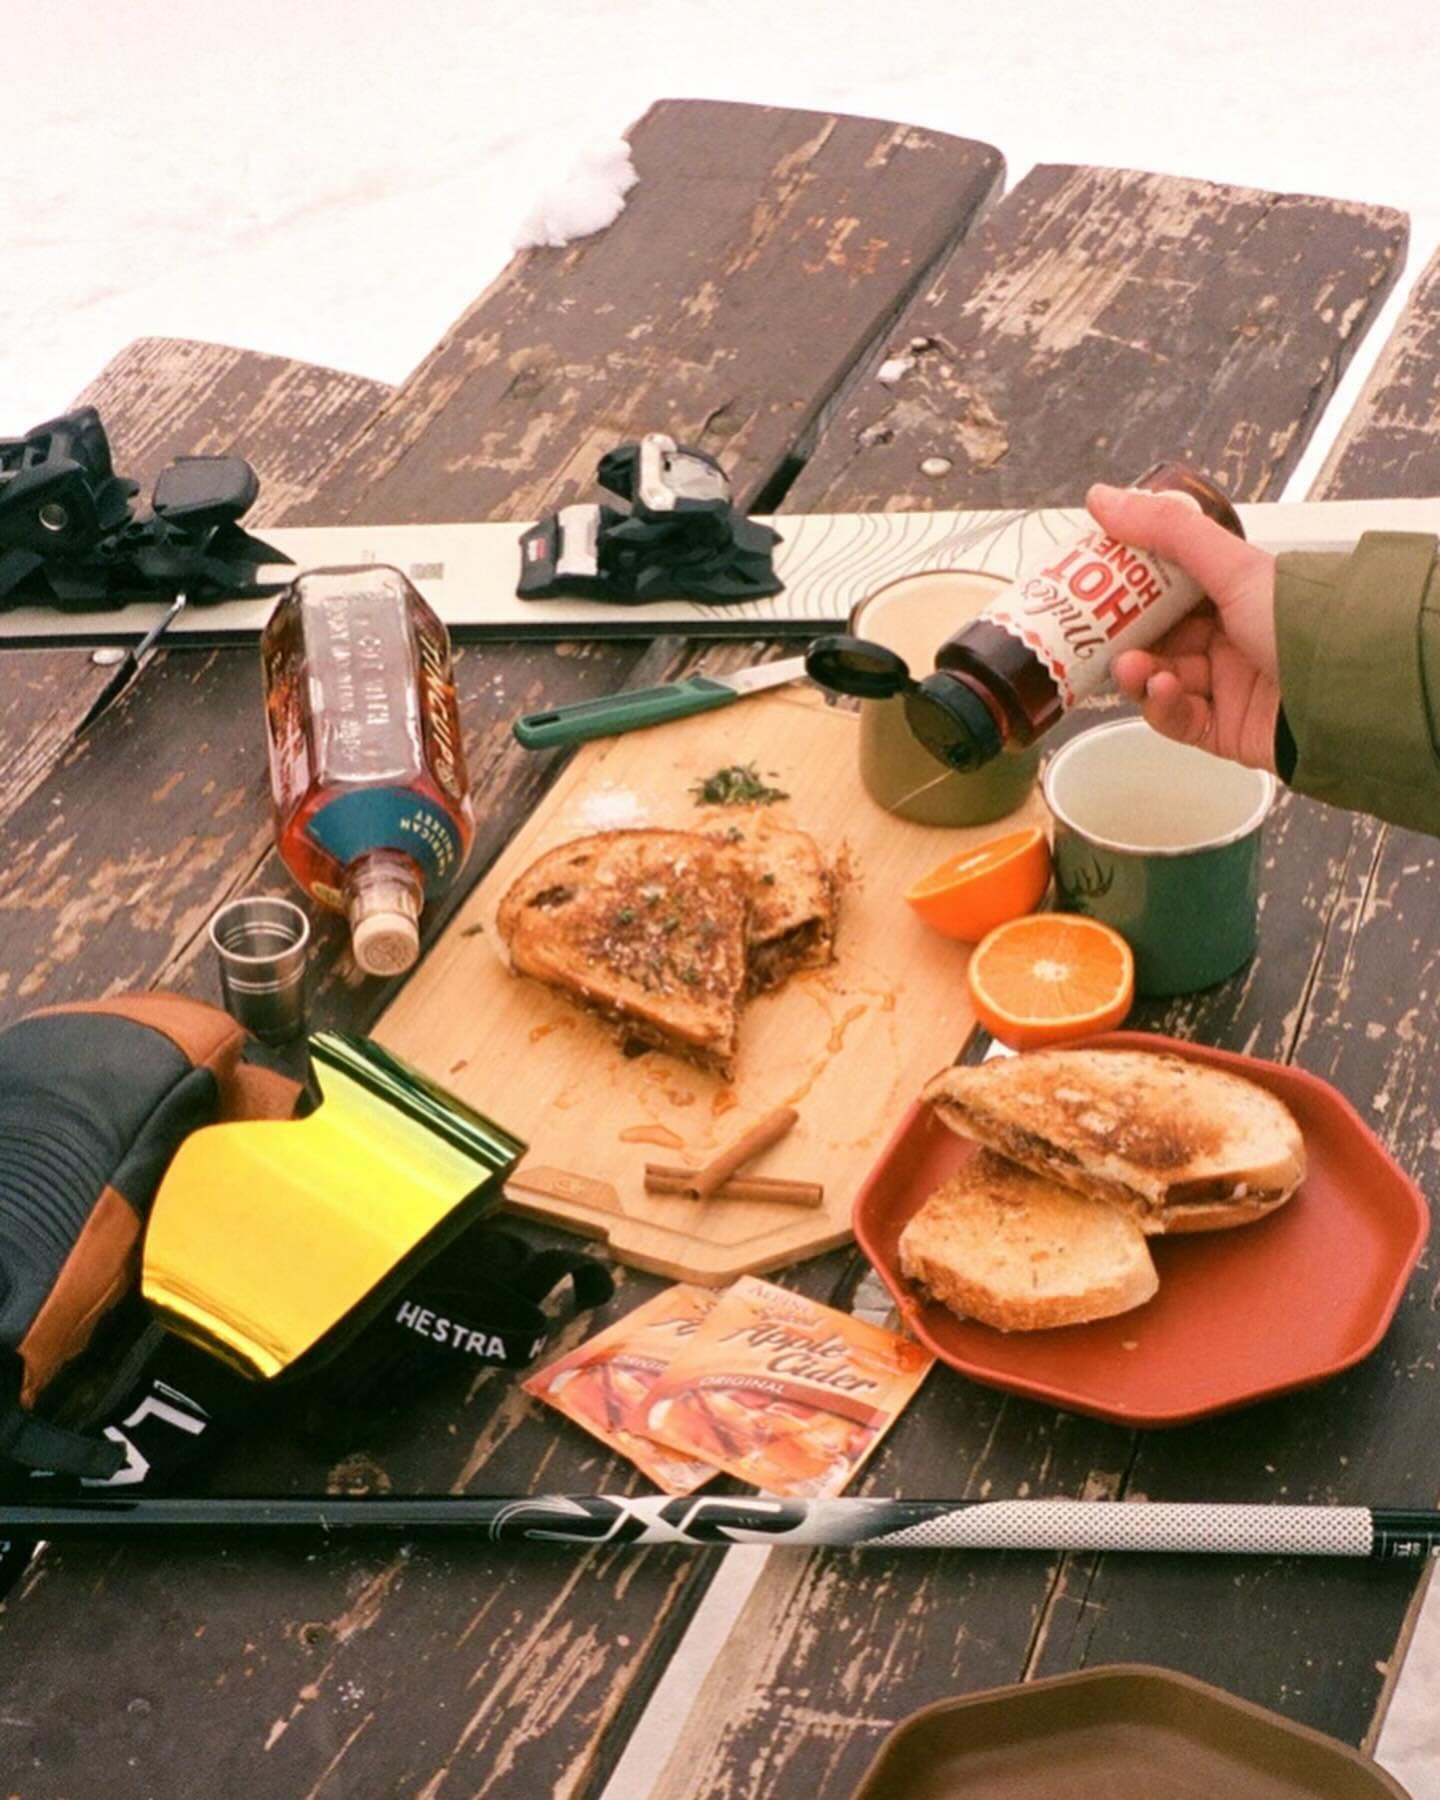 Episode 2 of wyld eats is live babyyyyy and we are APR&Egrave;S-ing

Make some oniony grilled cheeses and hot n spicy mochas with us as we squeeze the last bit of spring skiing out of the season! Link to watch is in our bio 🏂

Here are some snapshot